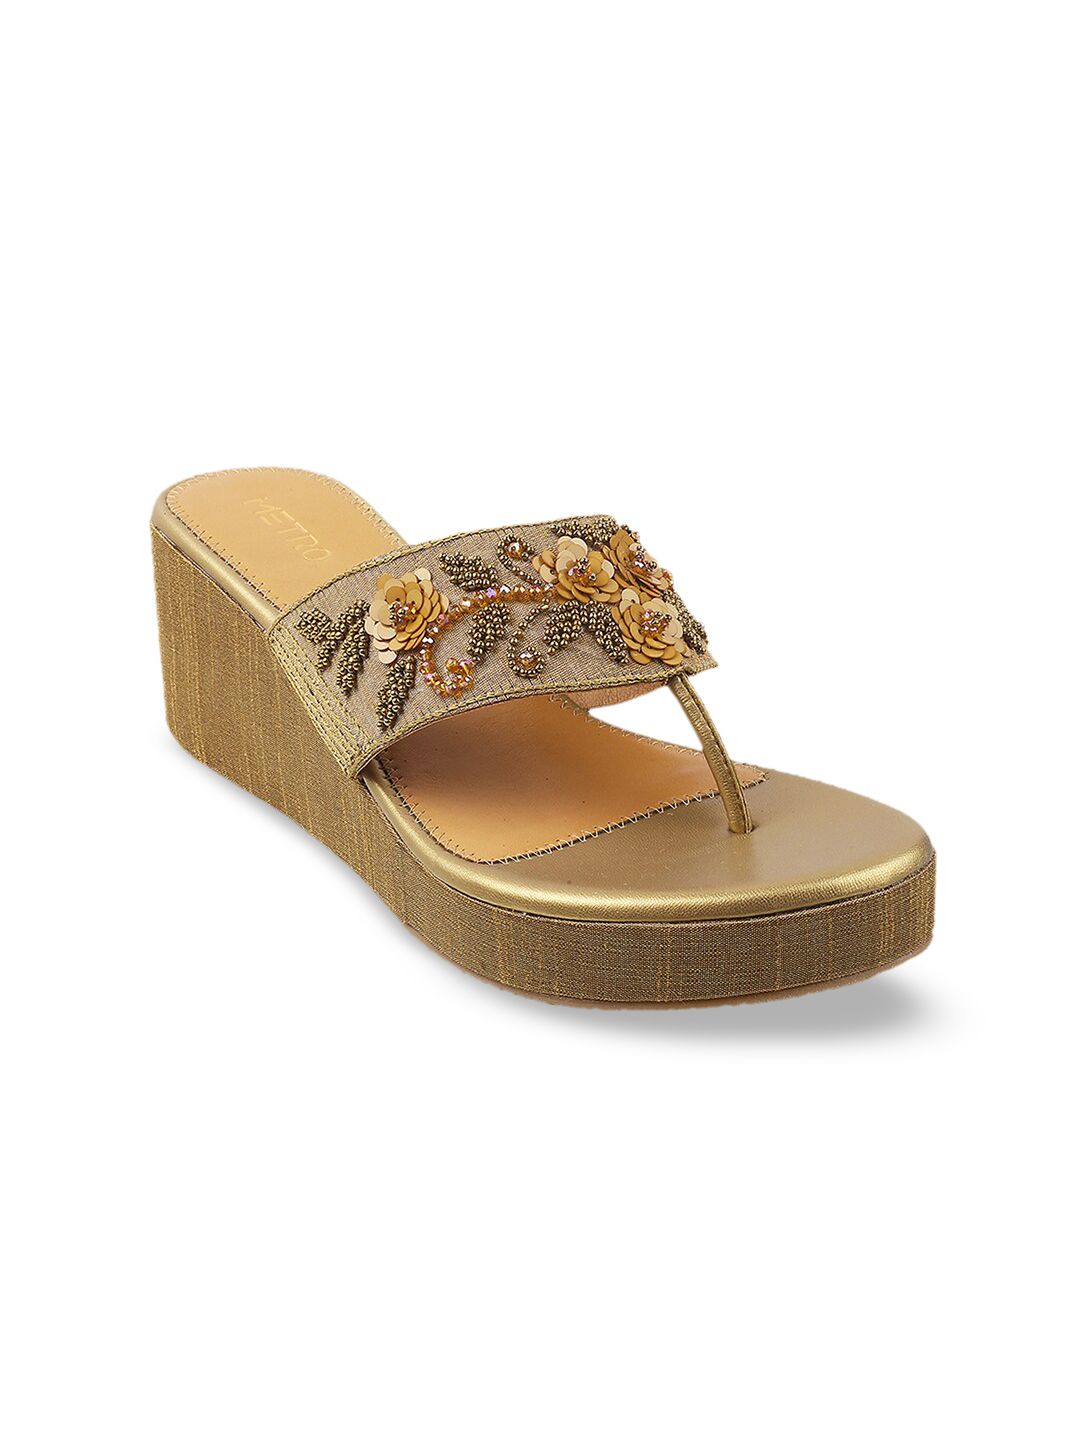 Metro Gold-Toned Embellished Wedges Price in India